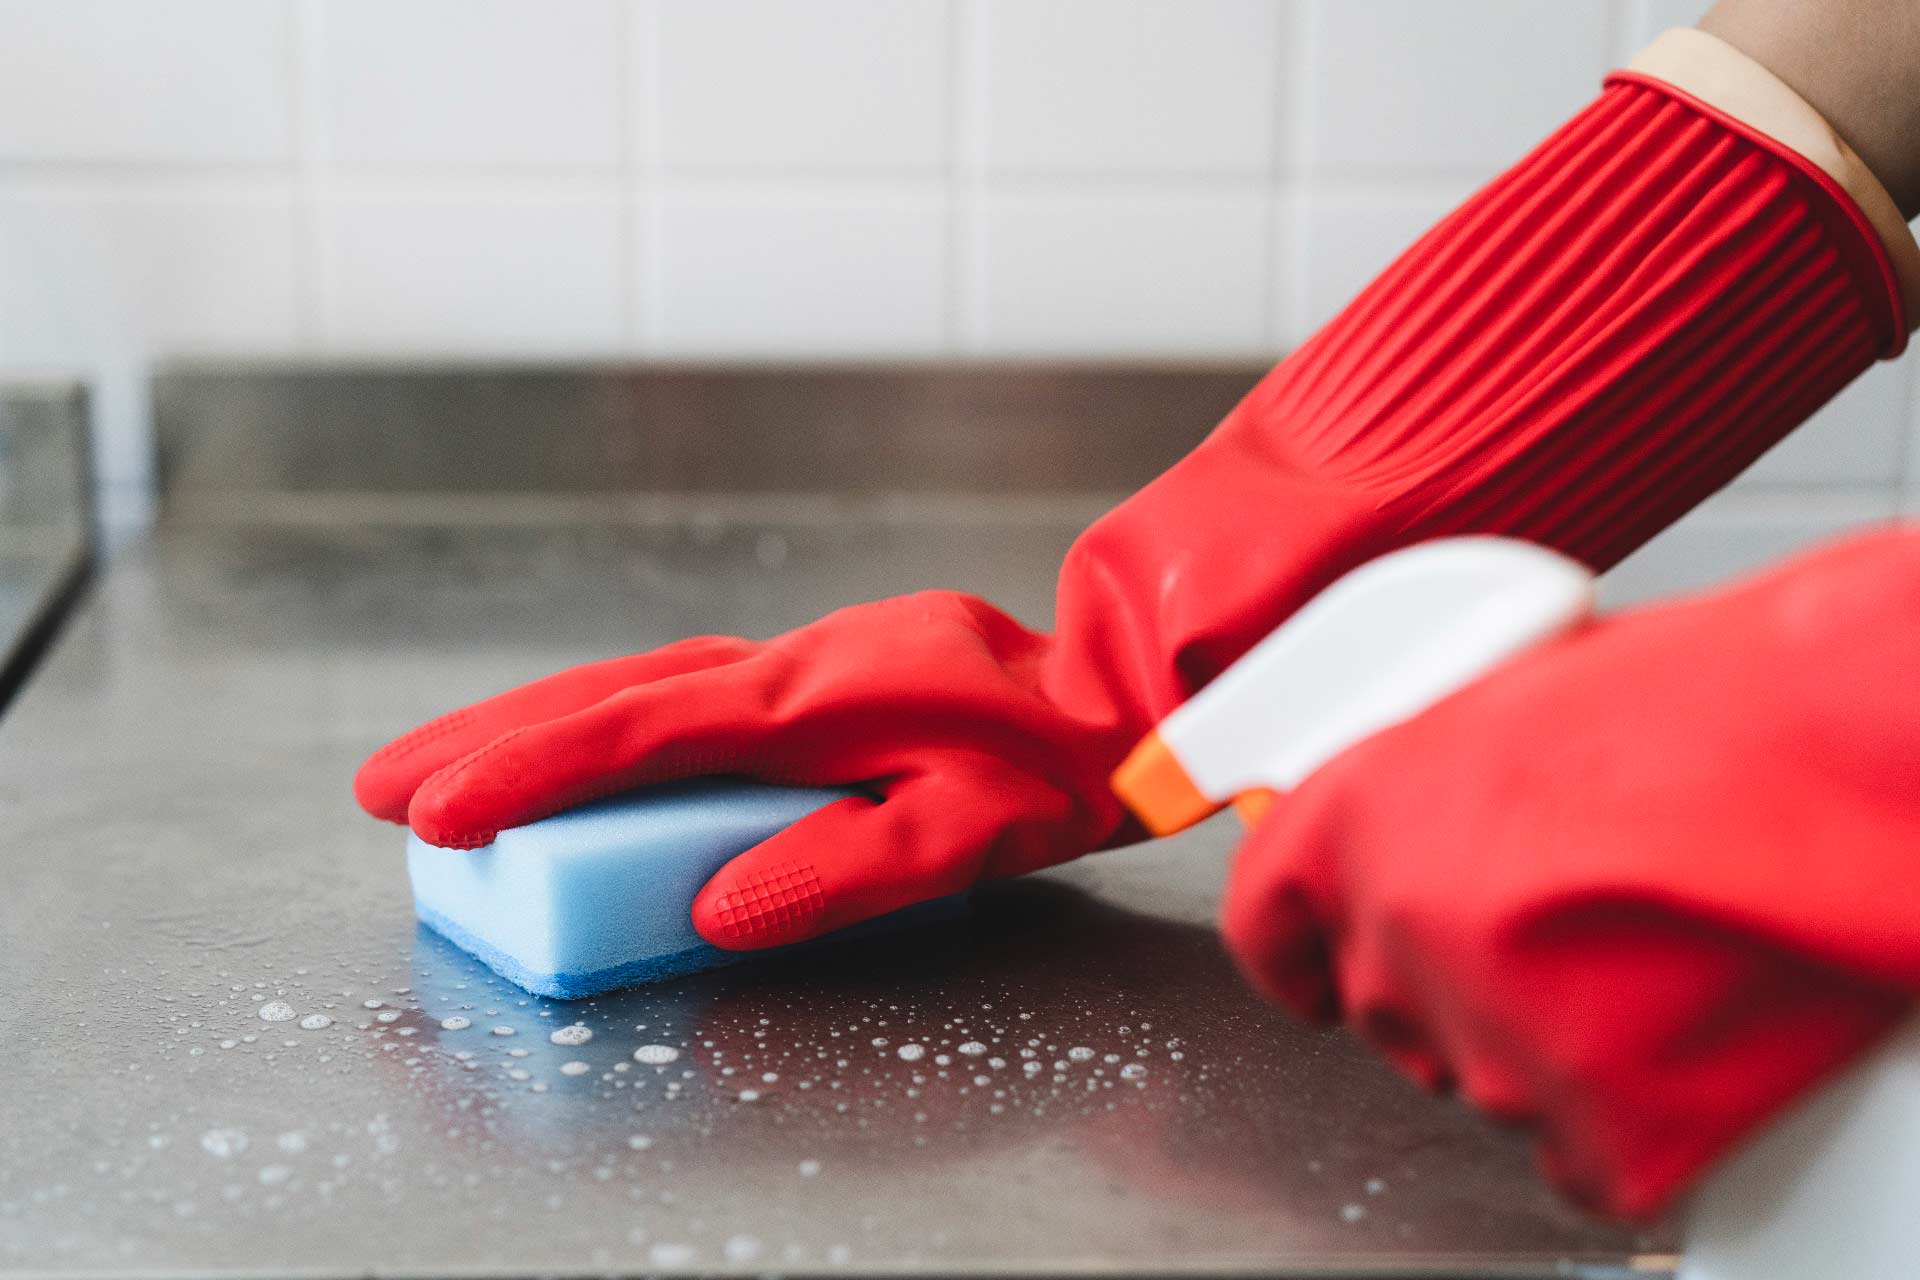 Close up of showing hands with rubber cleaning gloves on, spraying disinfectant and cleaning metal table top.